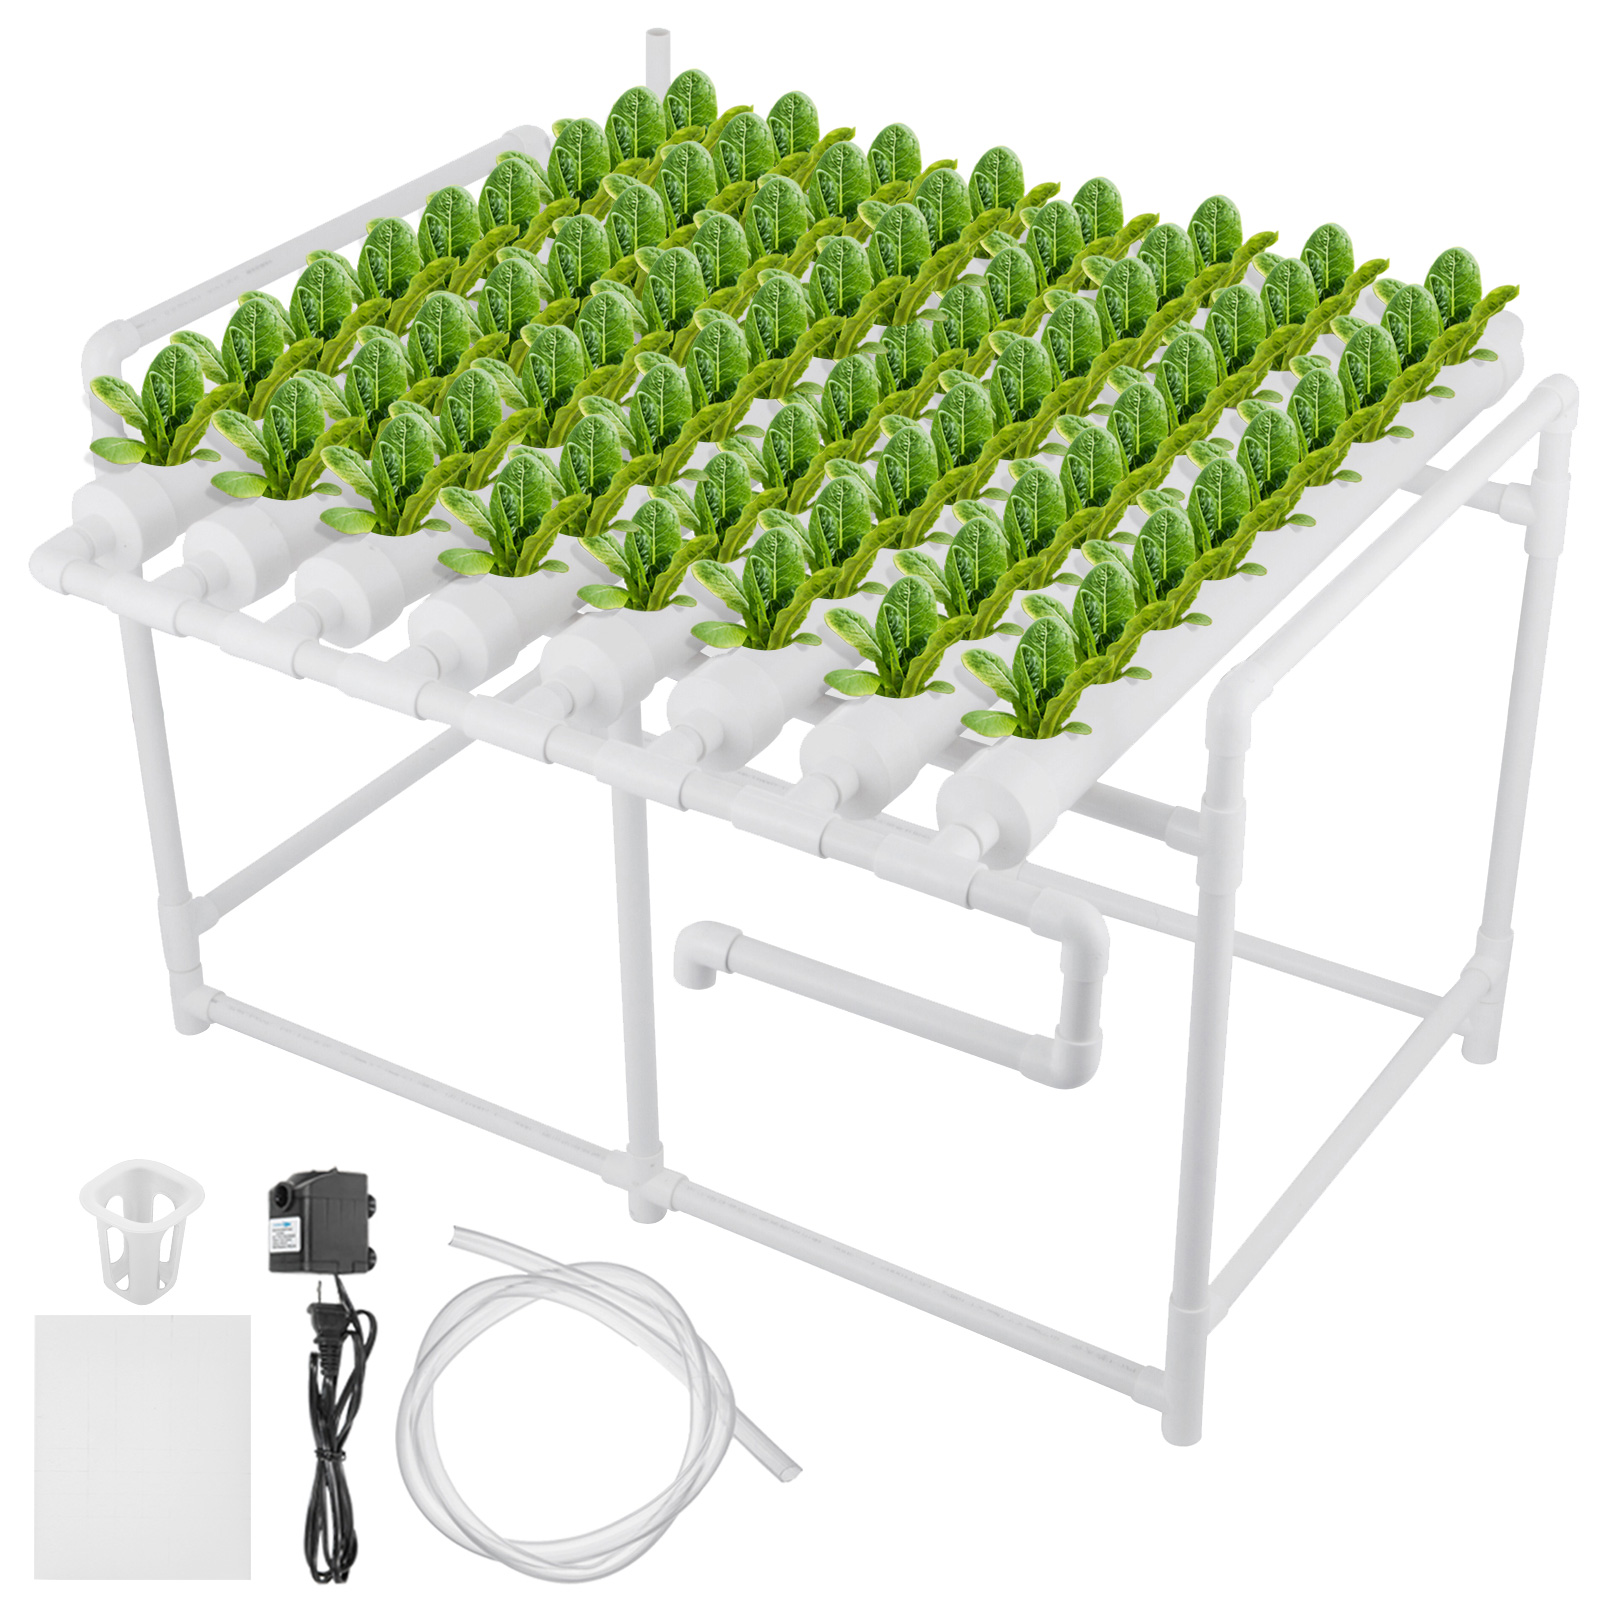 Hydroponic Site Grow Kit 72 Site Deep Water Culture Garden System Plant от Vevor Many GEOs